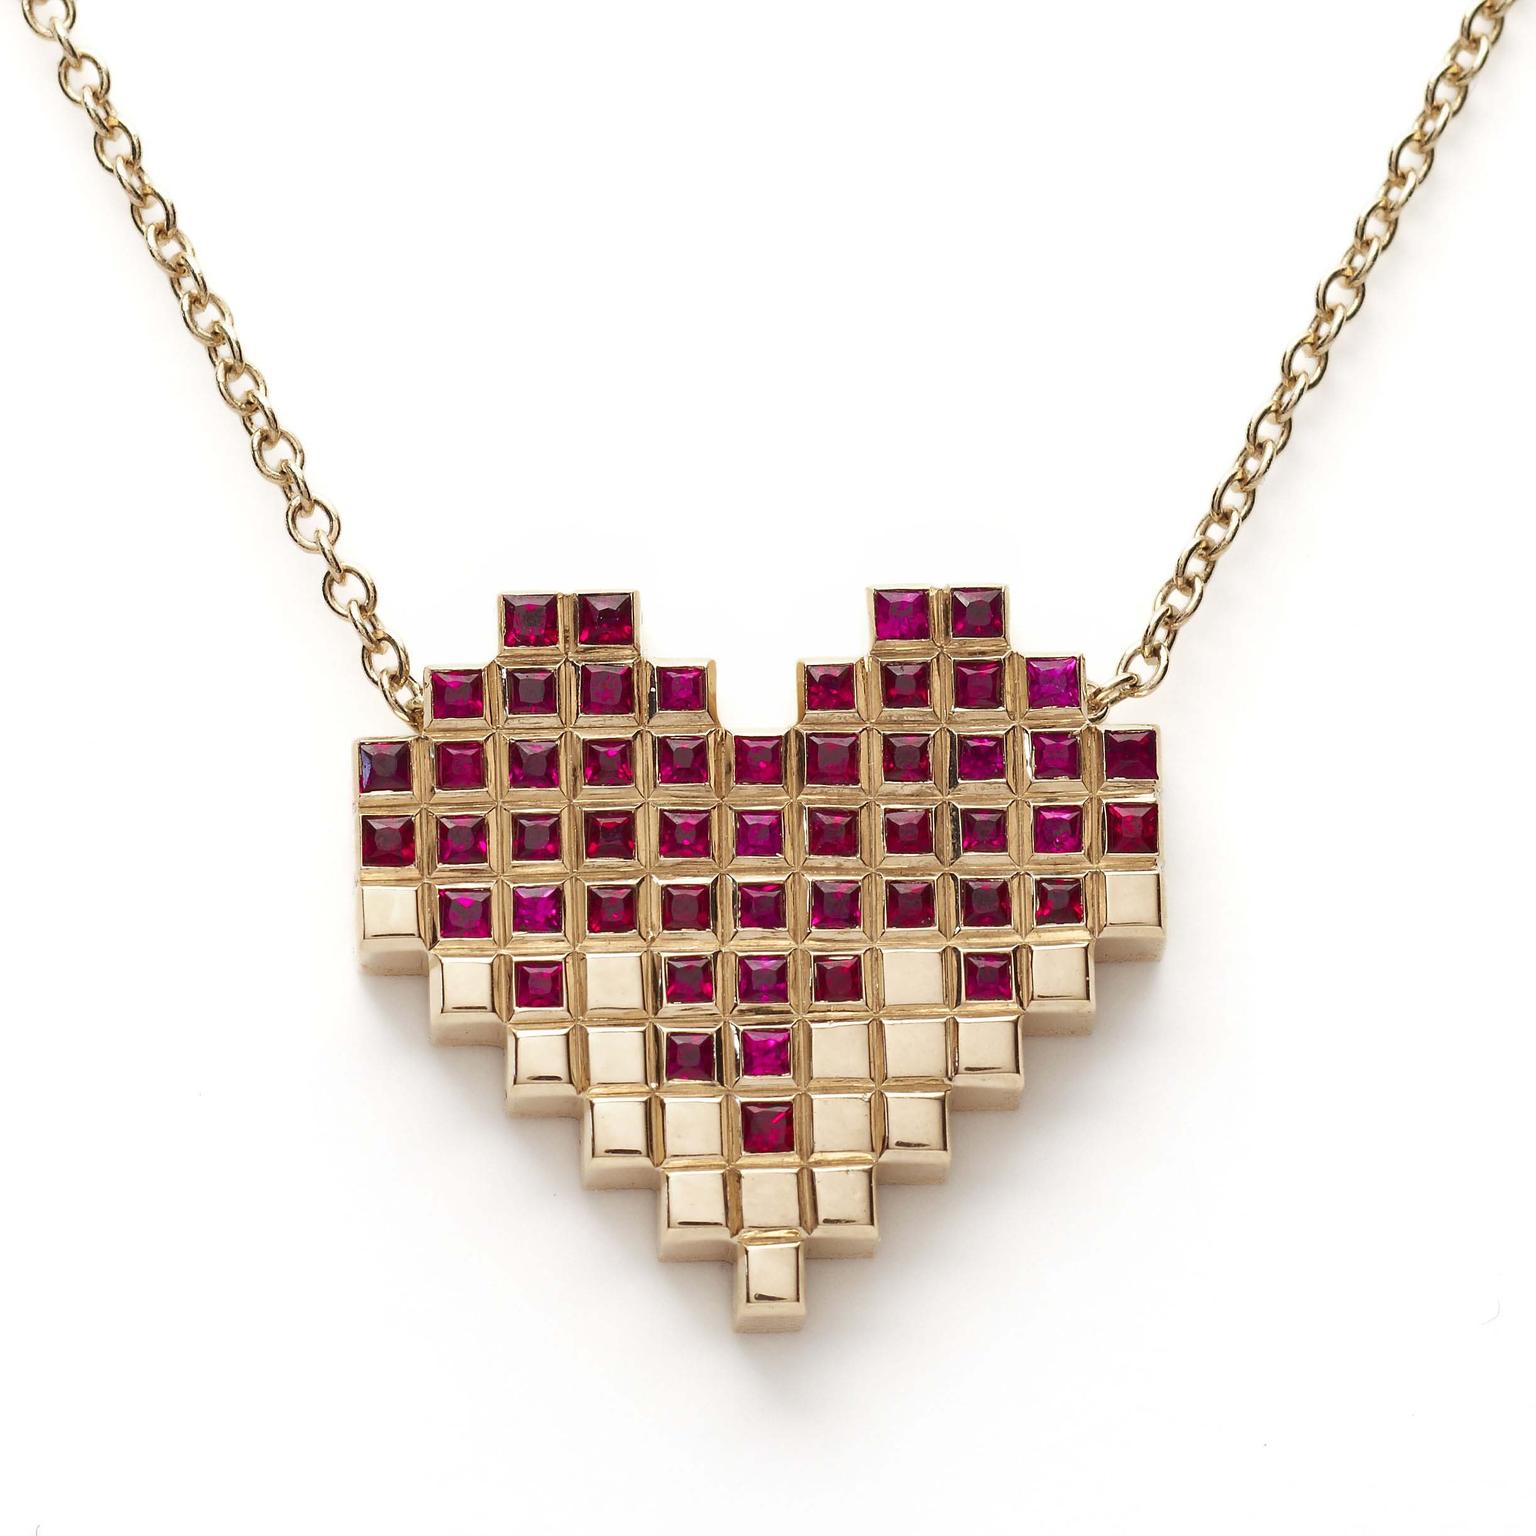 Pixelated jewels have flown the games console to conquer our hearts